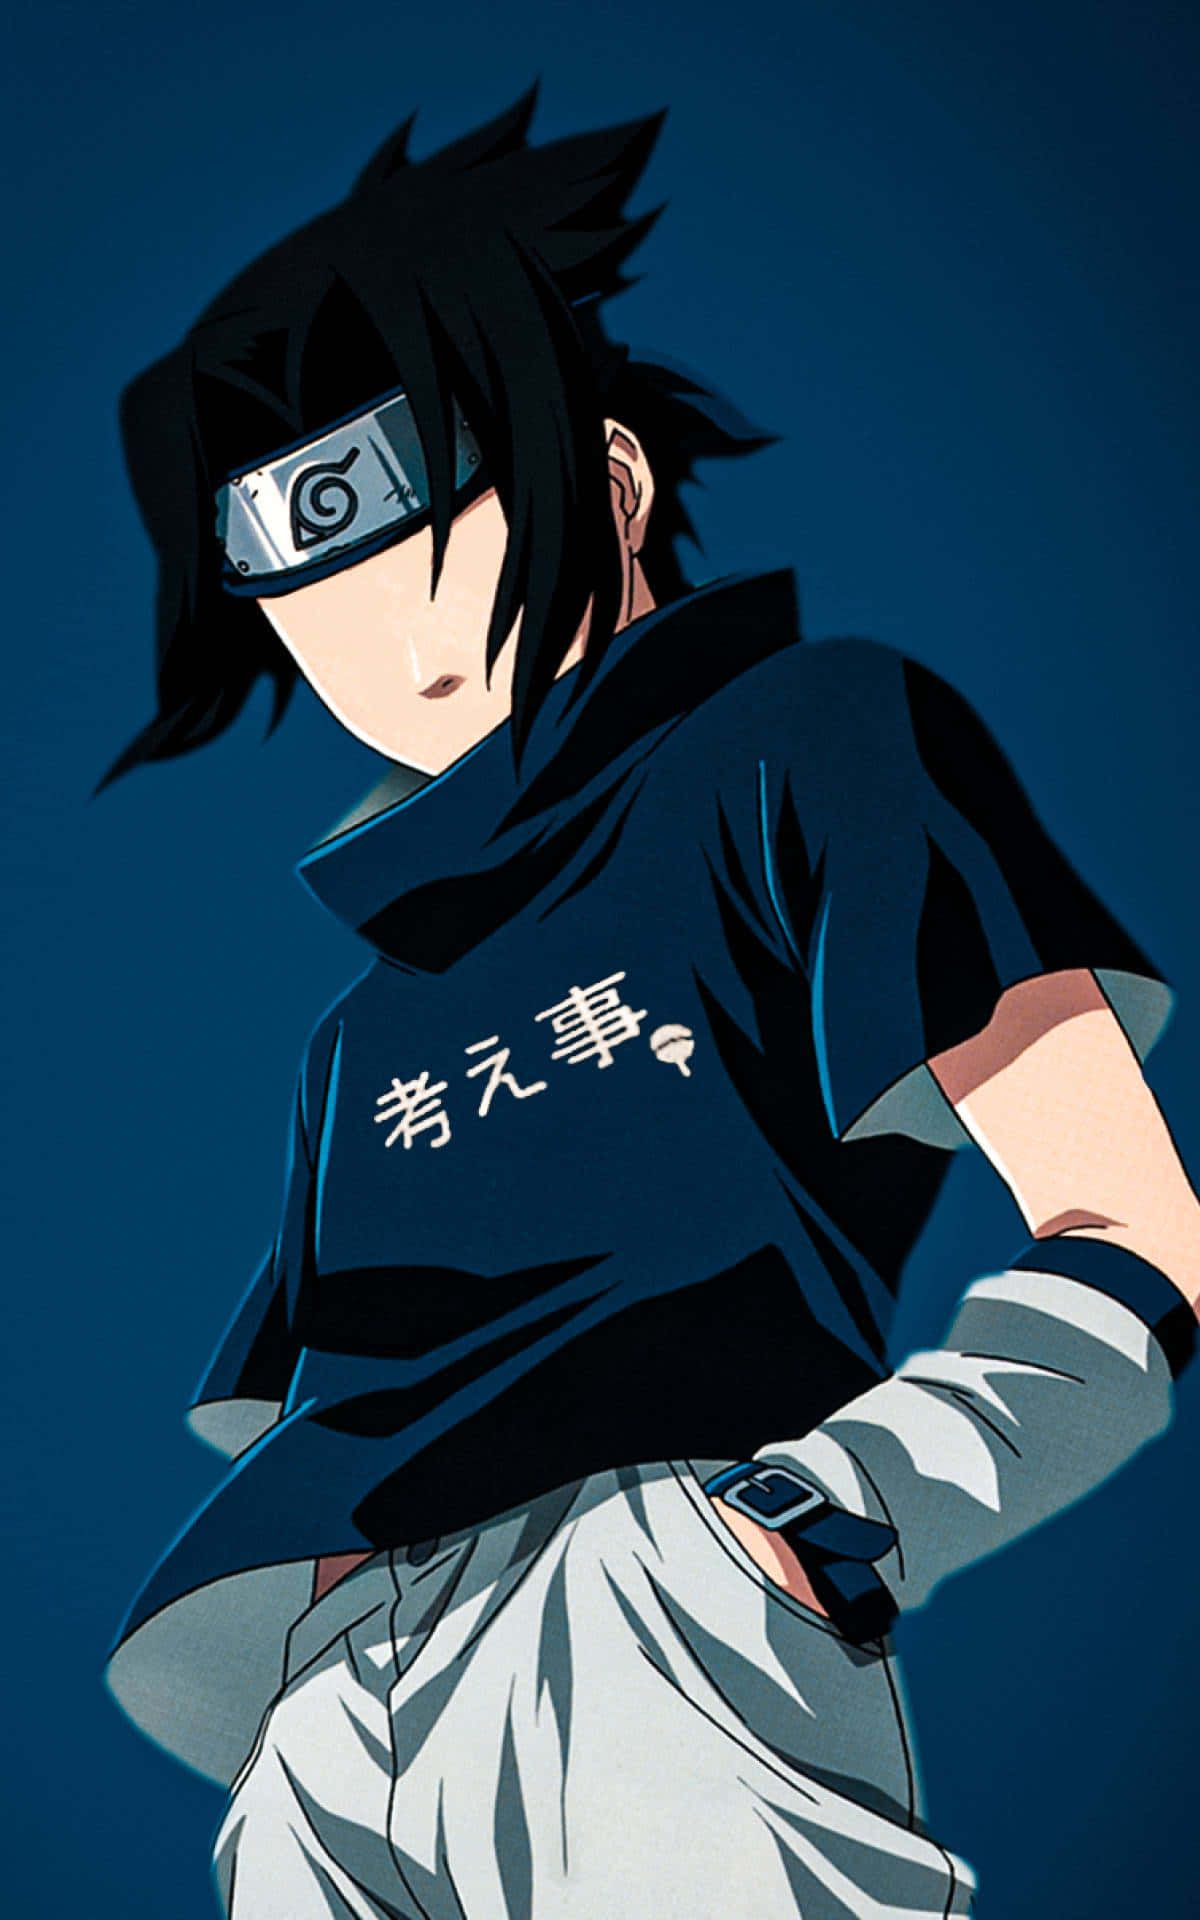 Download Naruto Wallpaper By Kpopboy1234567890 - Free on ZEDGE™ now. Browse millions of popular anime Wallpapers and Ringtones on Zedge and personalize your phone to suit you. Just because you're trying to stay in touch doesn't mean you can't show off your style. - Sasuke Uchiha